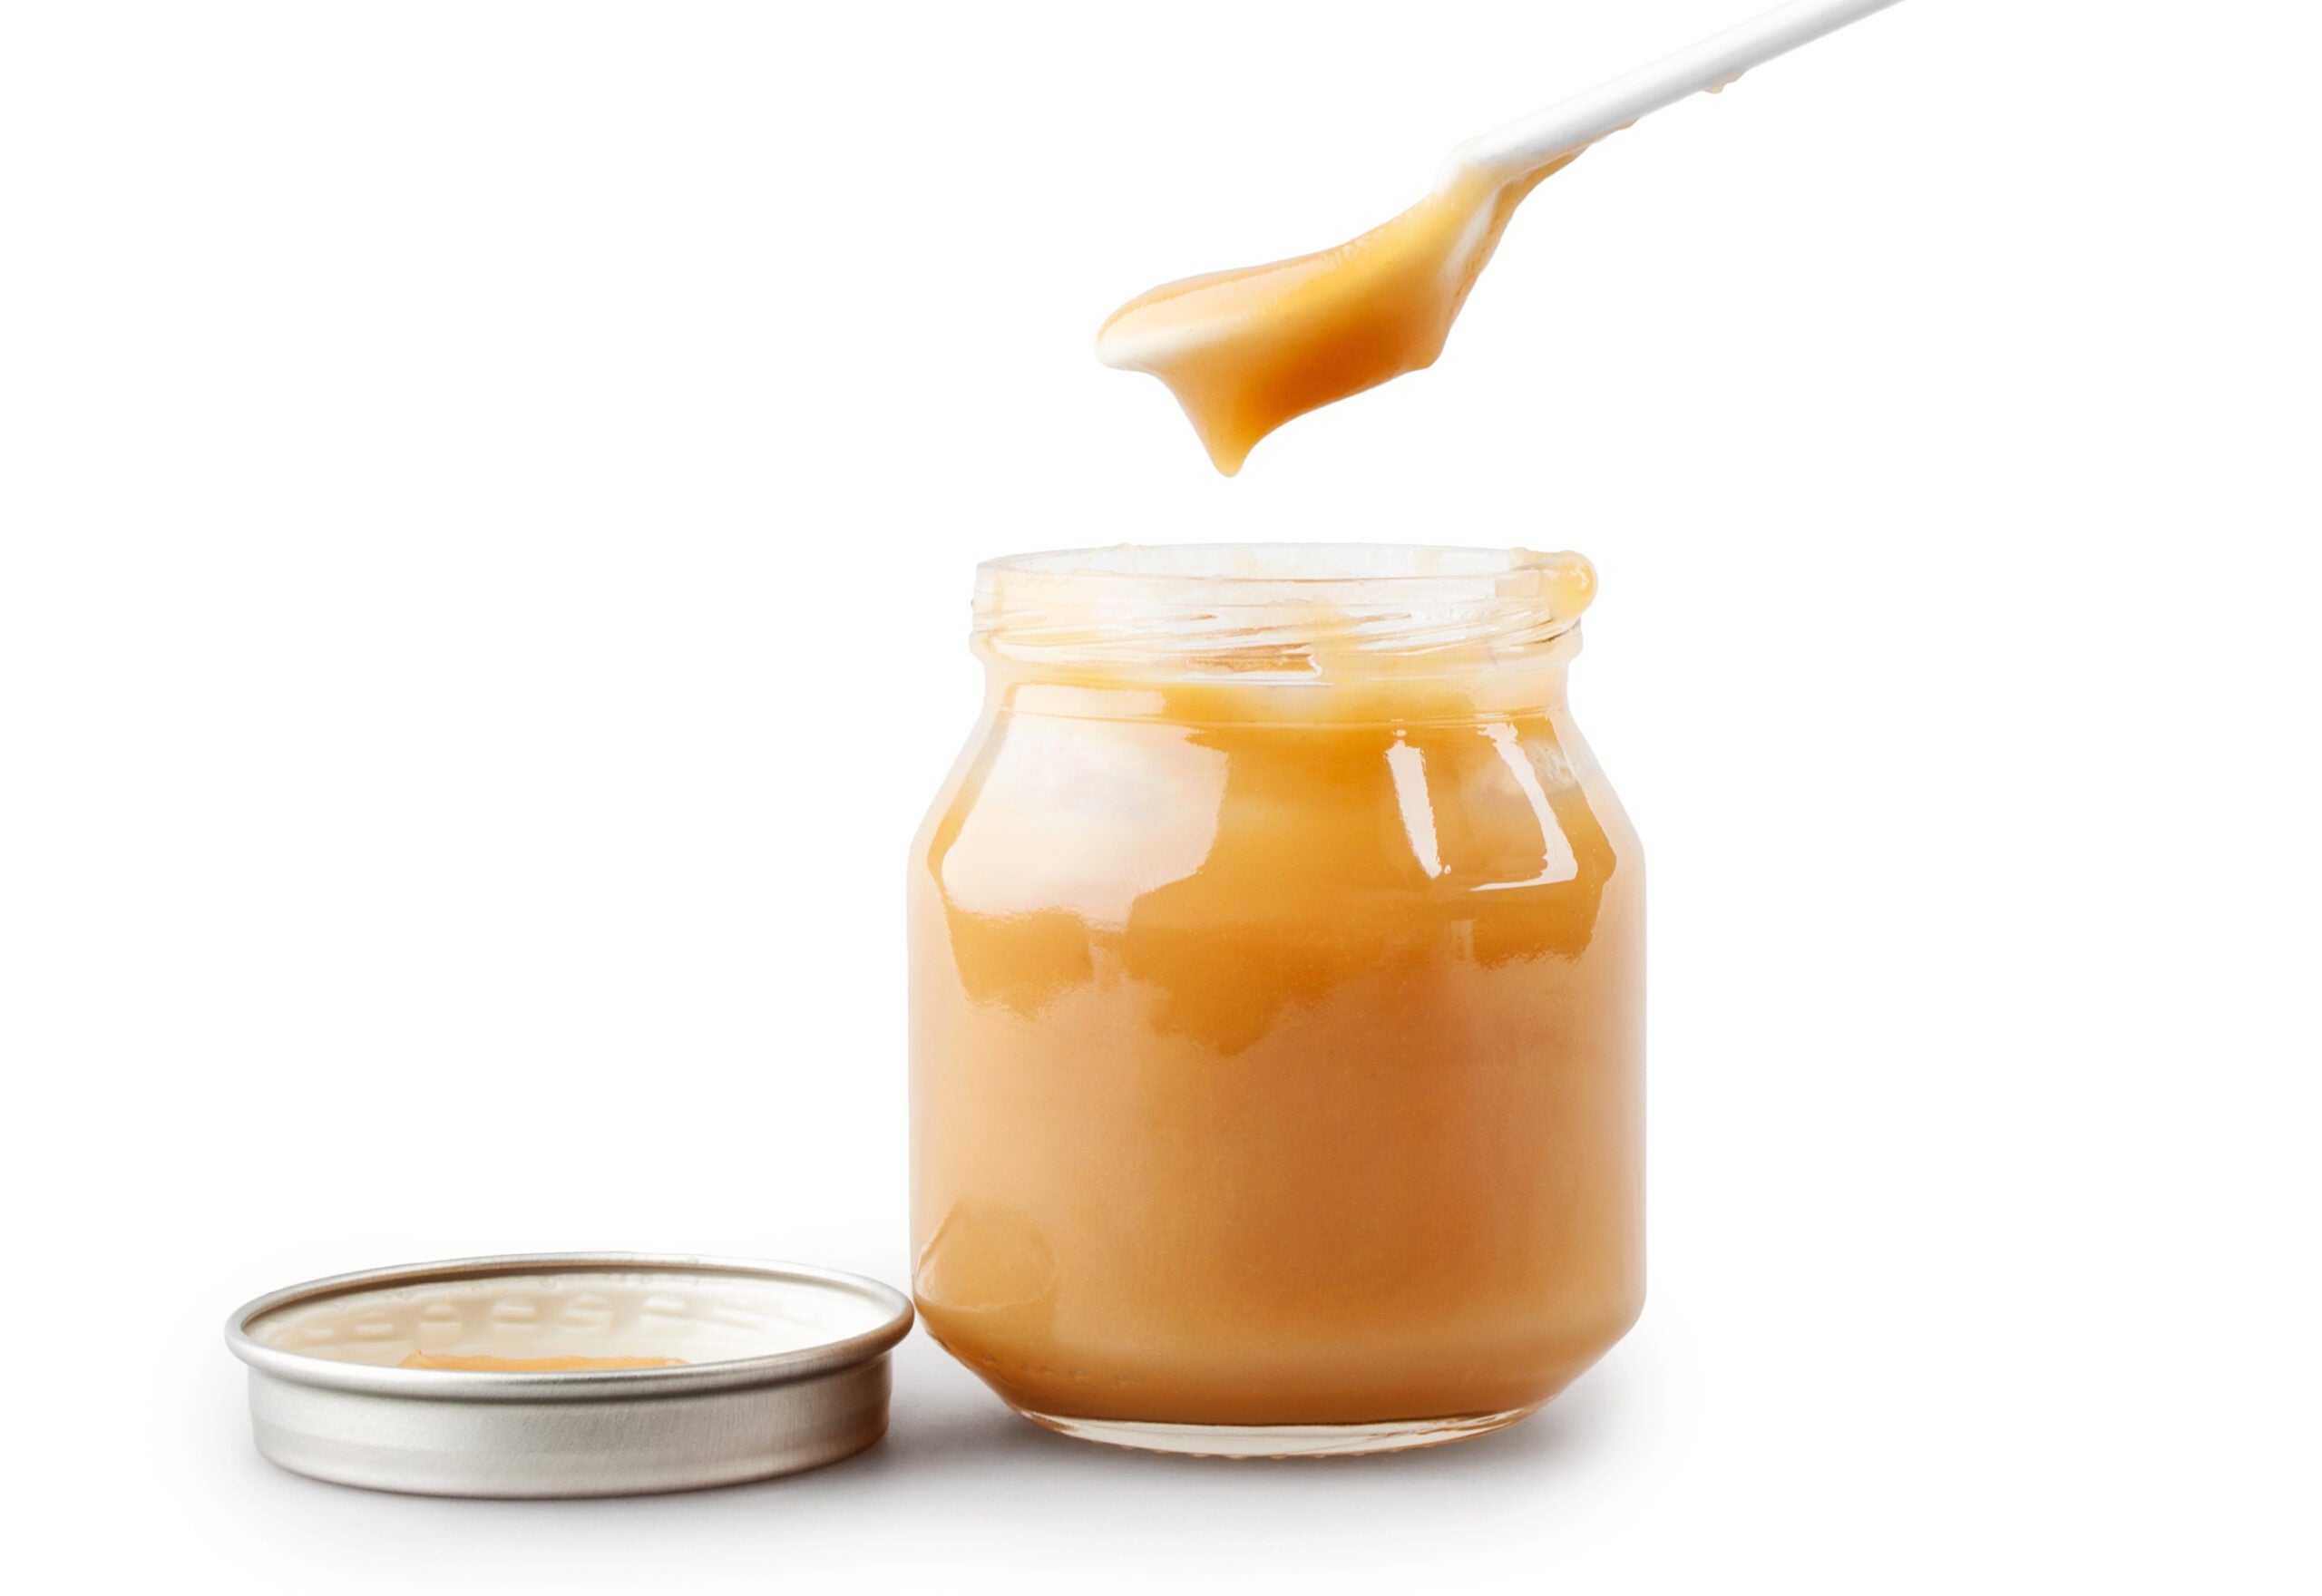 alt = a spoon lifts orange baby food out of a jar with a lid sits next to it